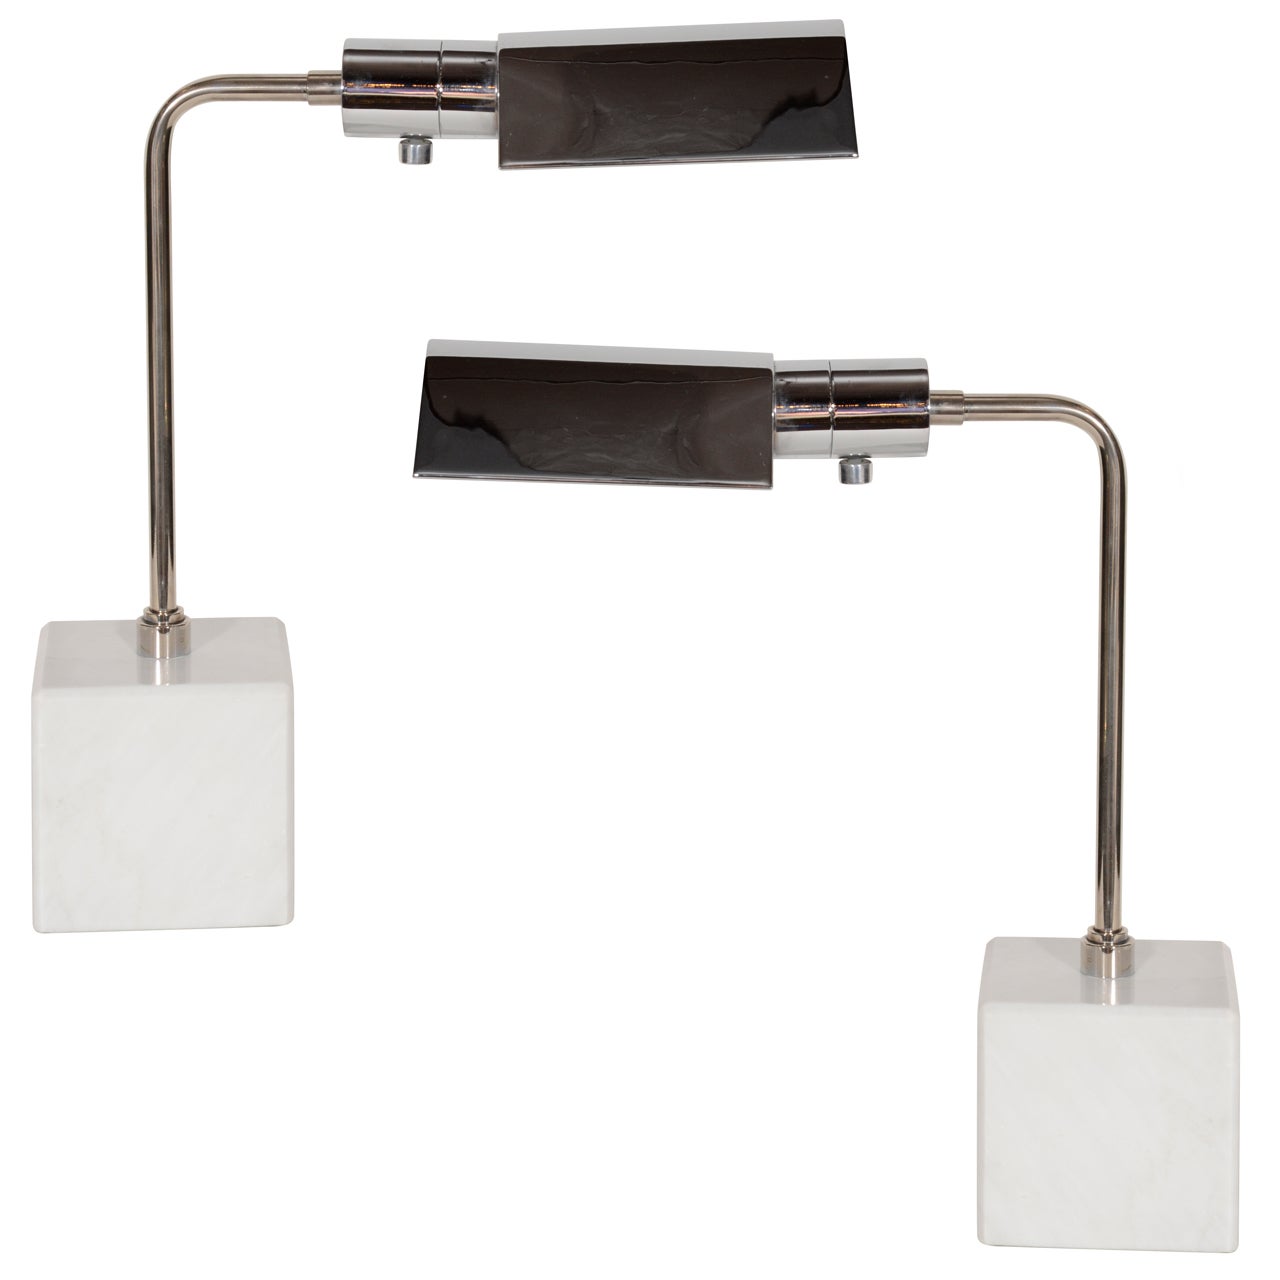 Pair of Modernist Chrome Desk Lamps with Marble Bases Designed by Koch and Lowy